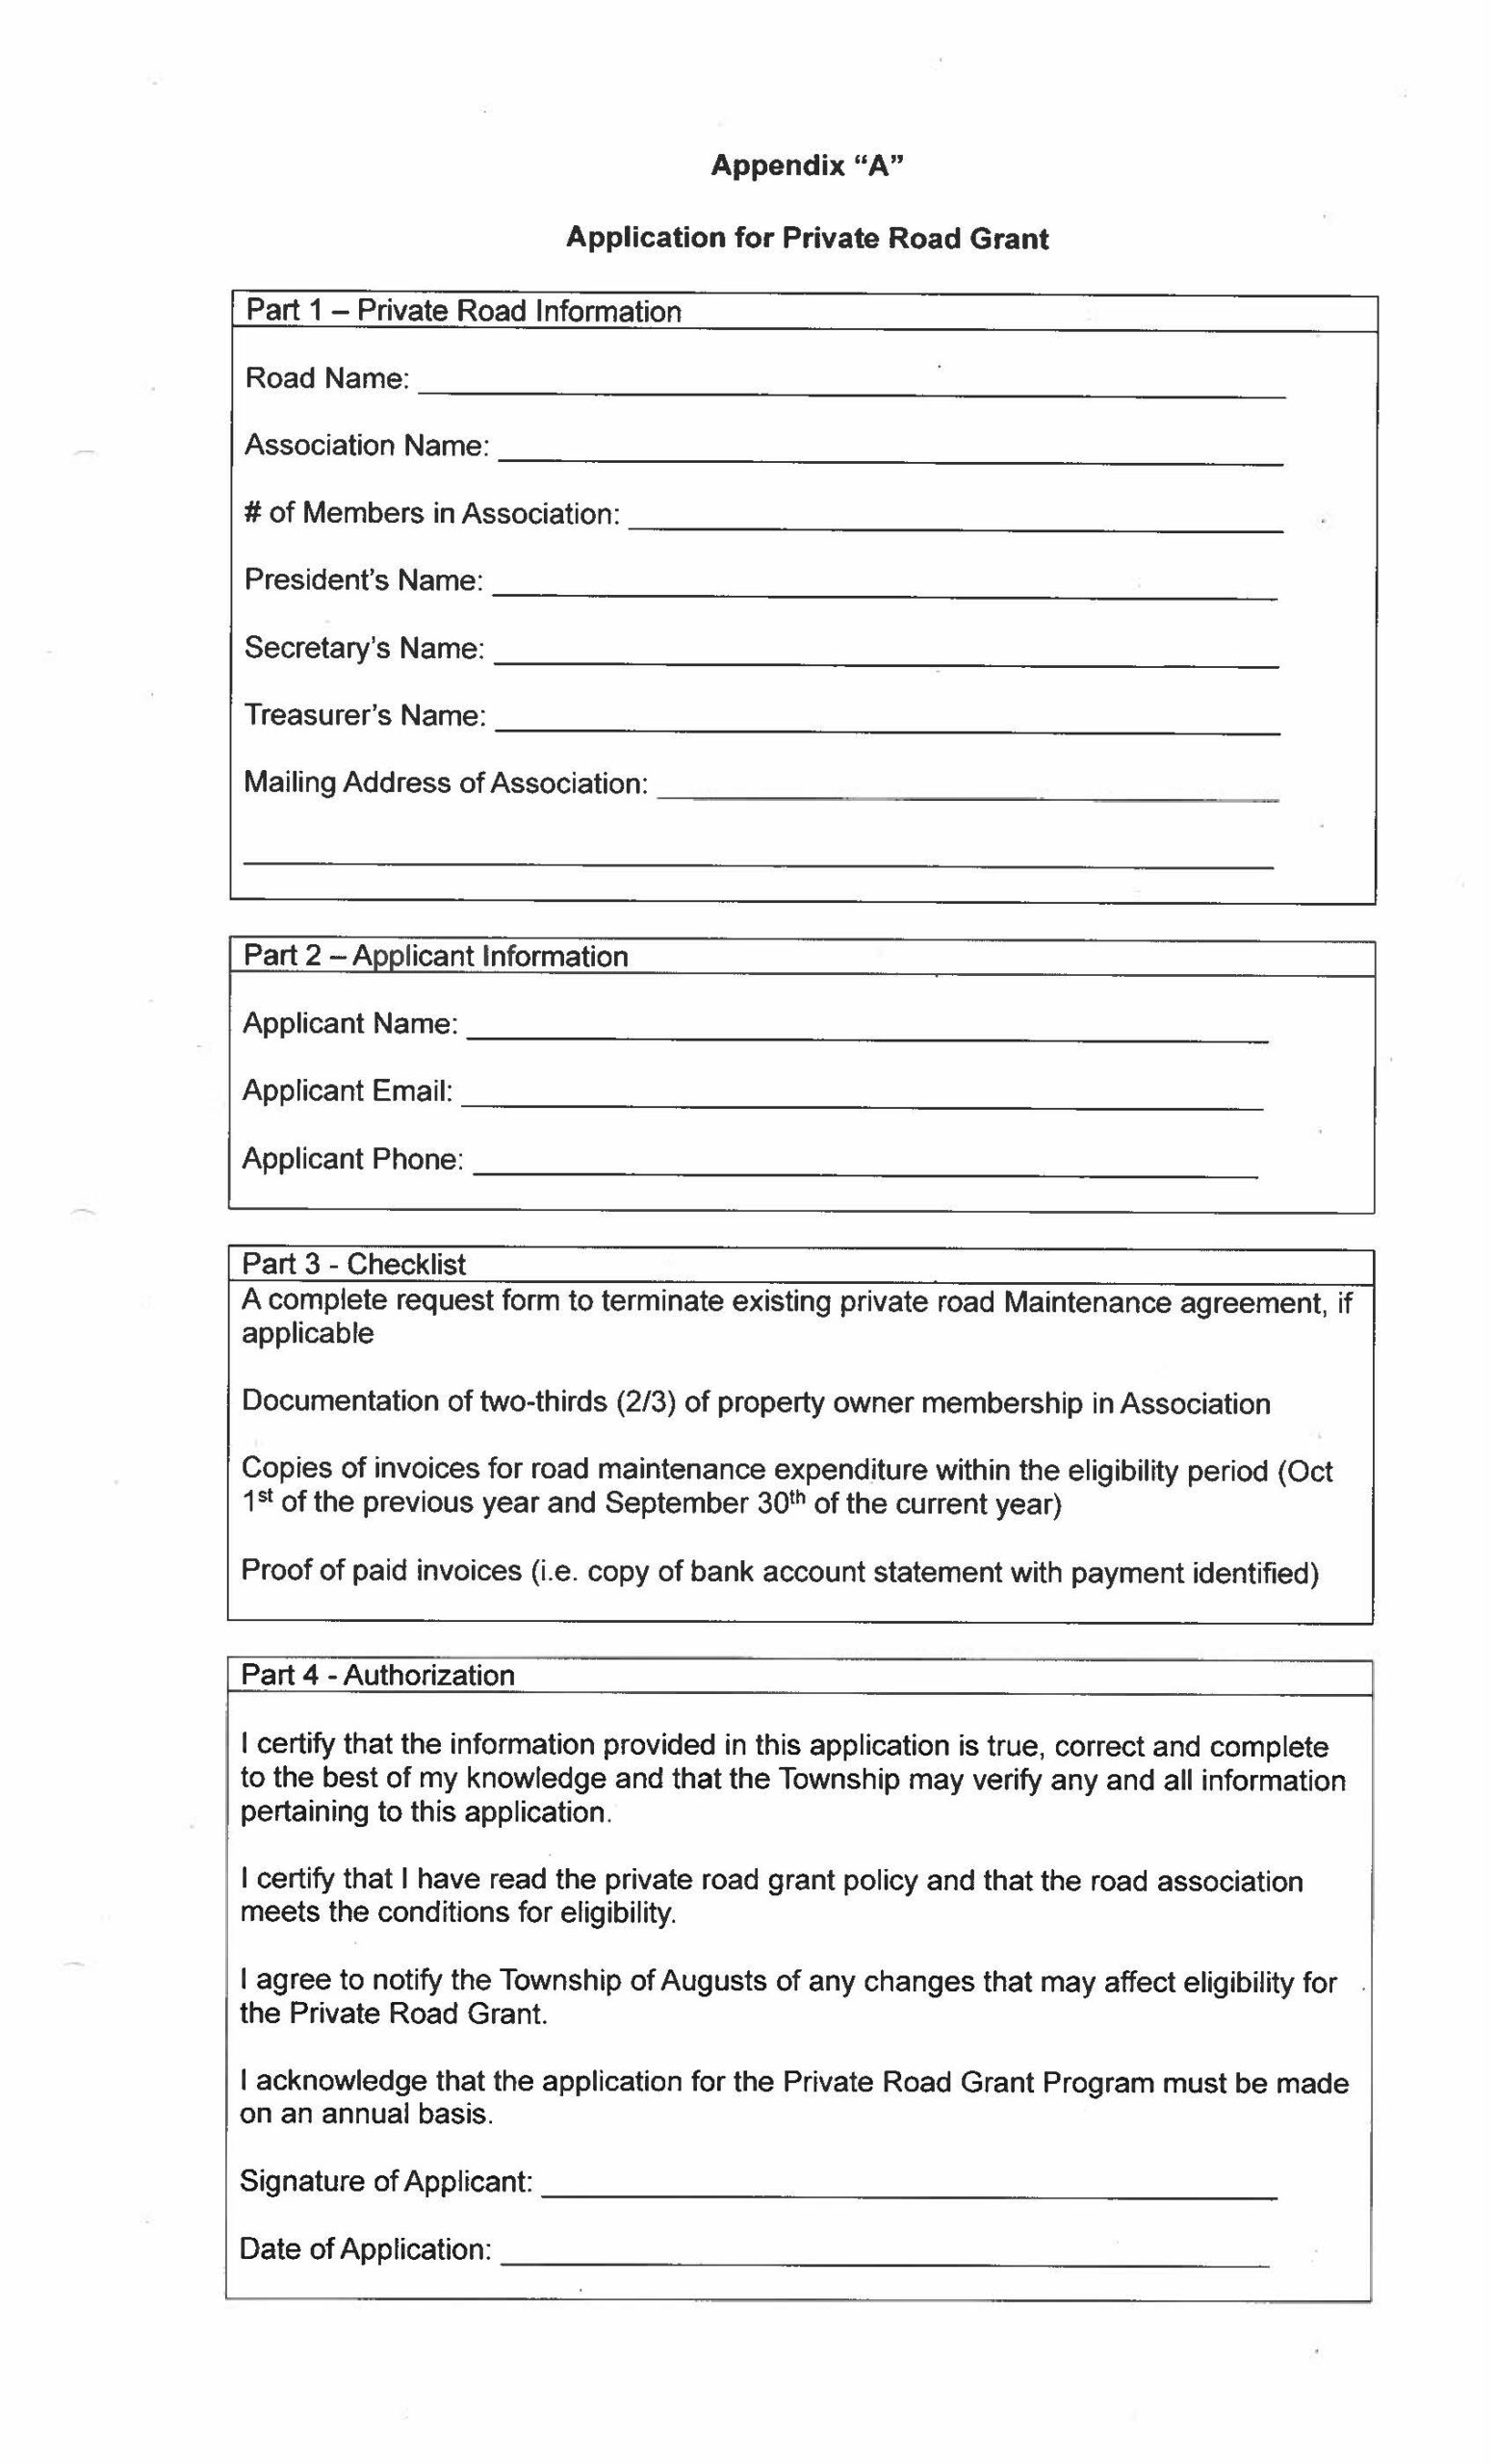 application for private road grant page 01